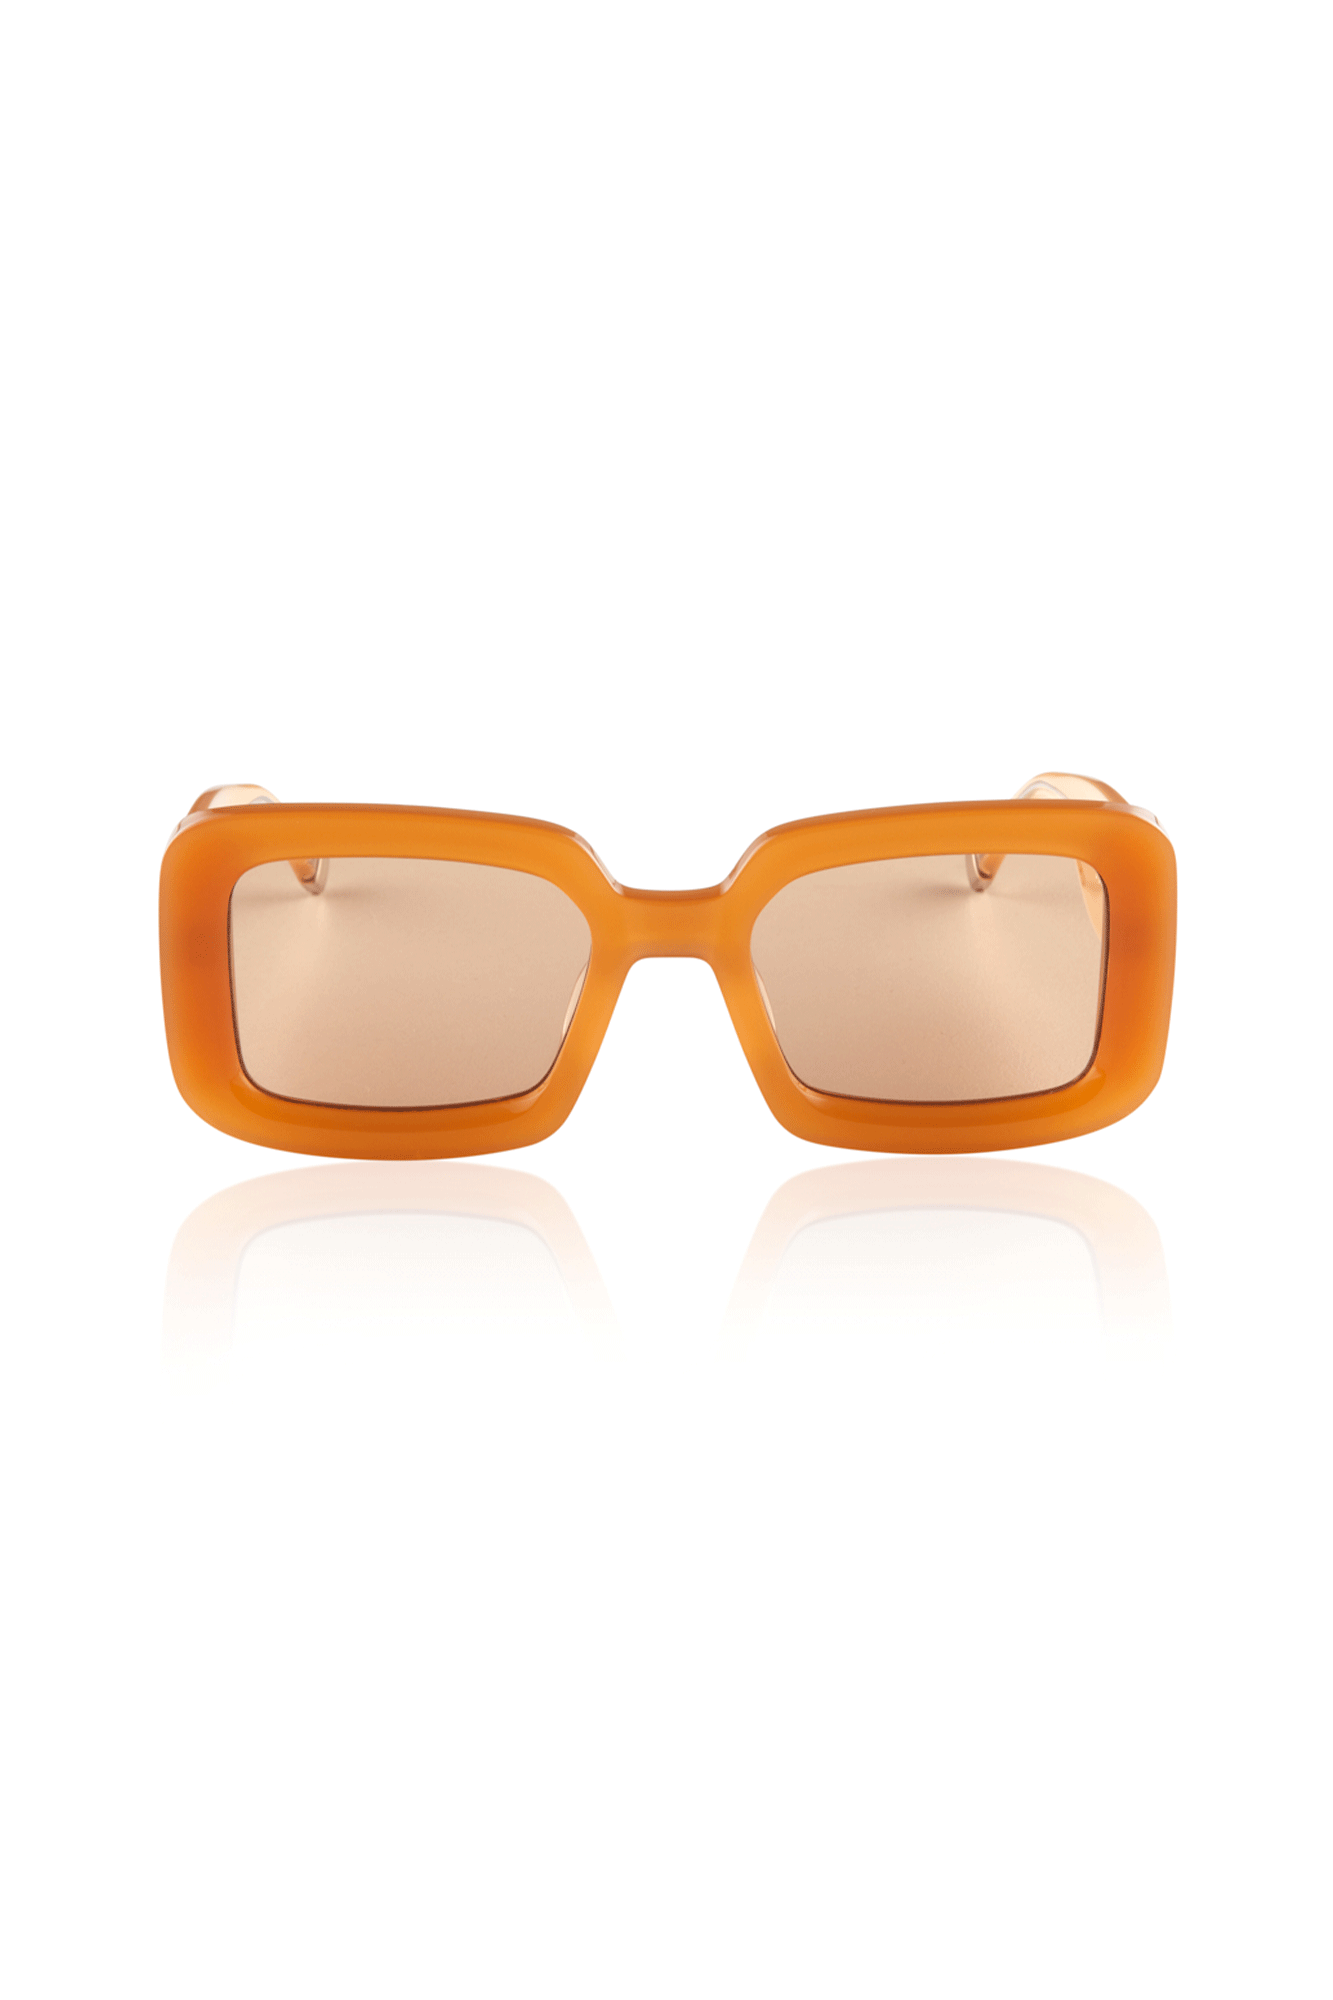 Las Palmas - Peach CO sunglasses from Oscar x Frank are designed for long-wearing comfort. Featuring ultra-lightweight frames and lenses that block 100% of UV rays, these sunglasses will keep your eyes protected in style.